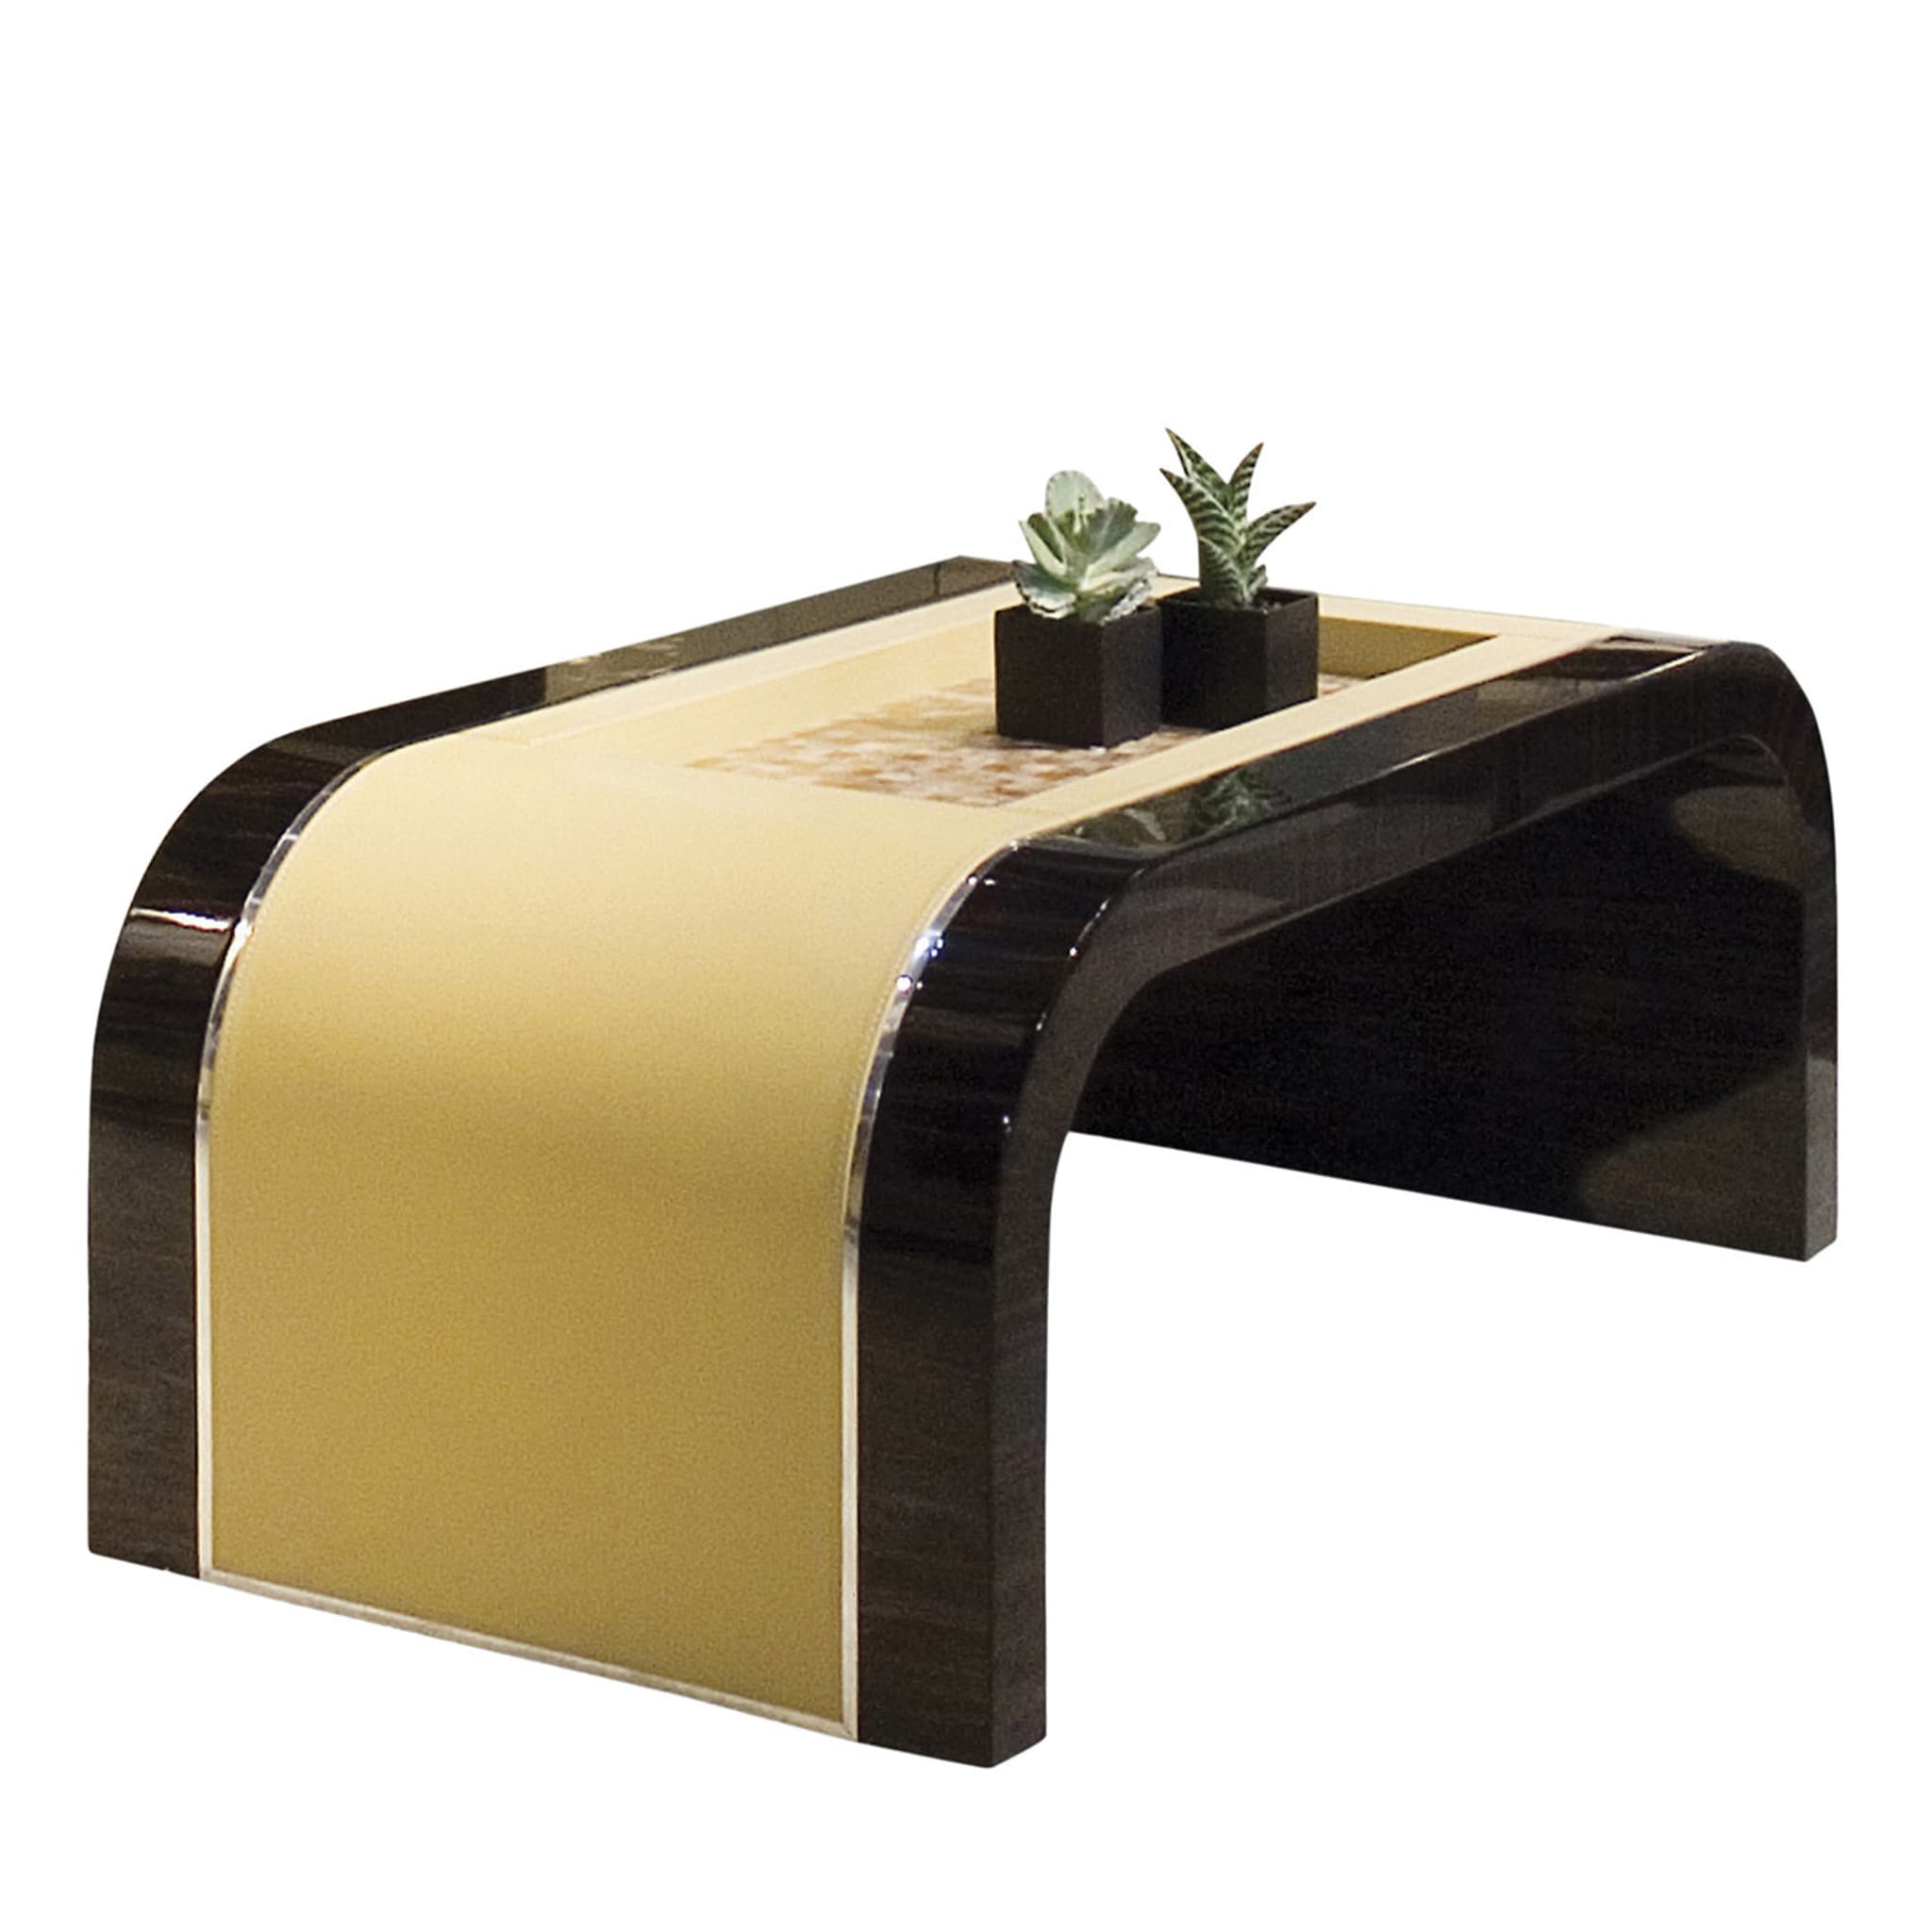 Horn Coffee Table by Alessandro Massari - Main view